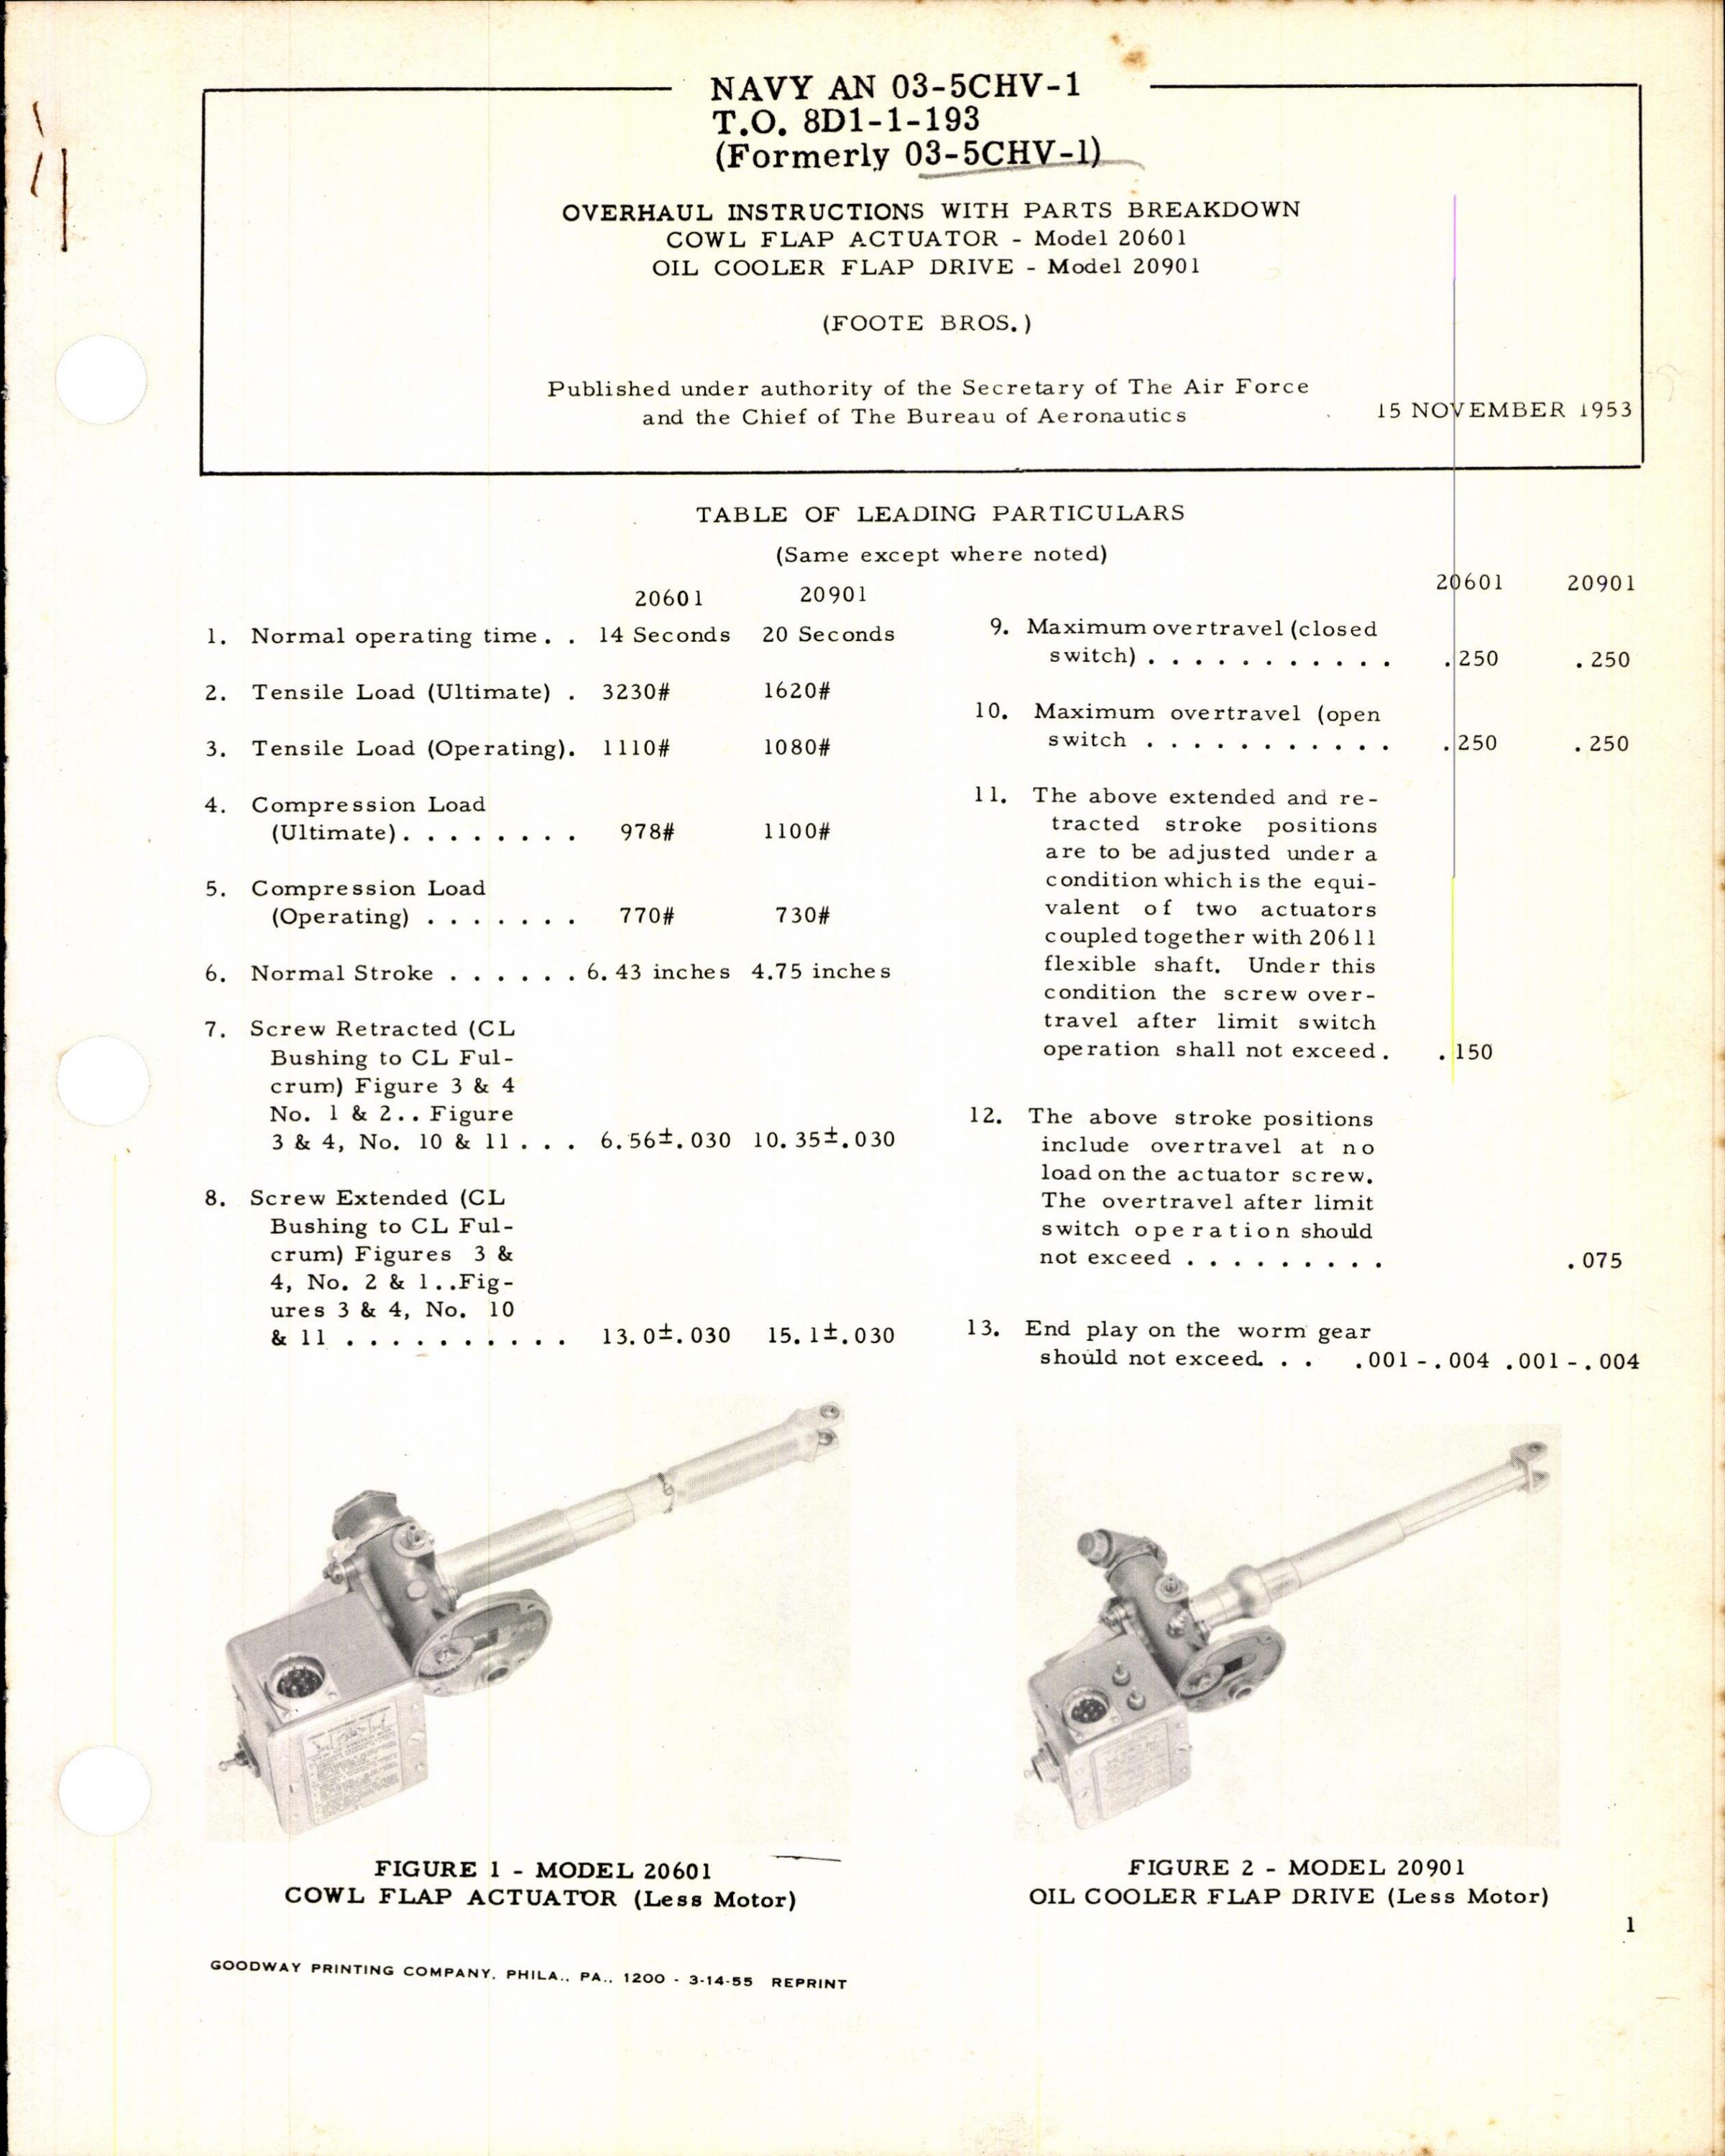 Sample page 1 from AirCorps Library document: Instructions w PB for Cowl Cooler Flap Actuator & Oil Cooler Flap